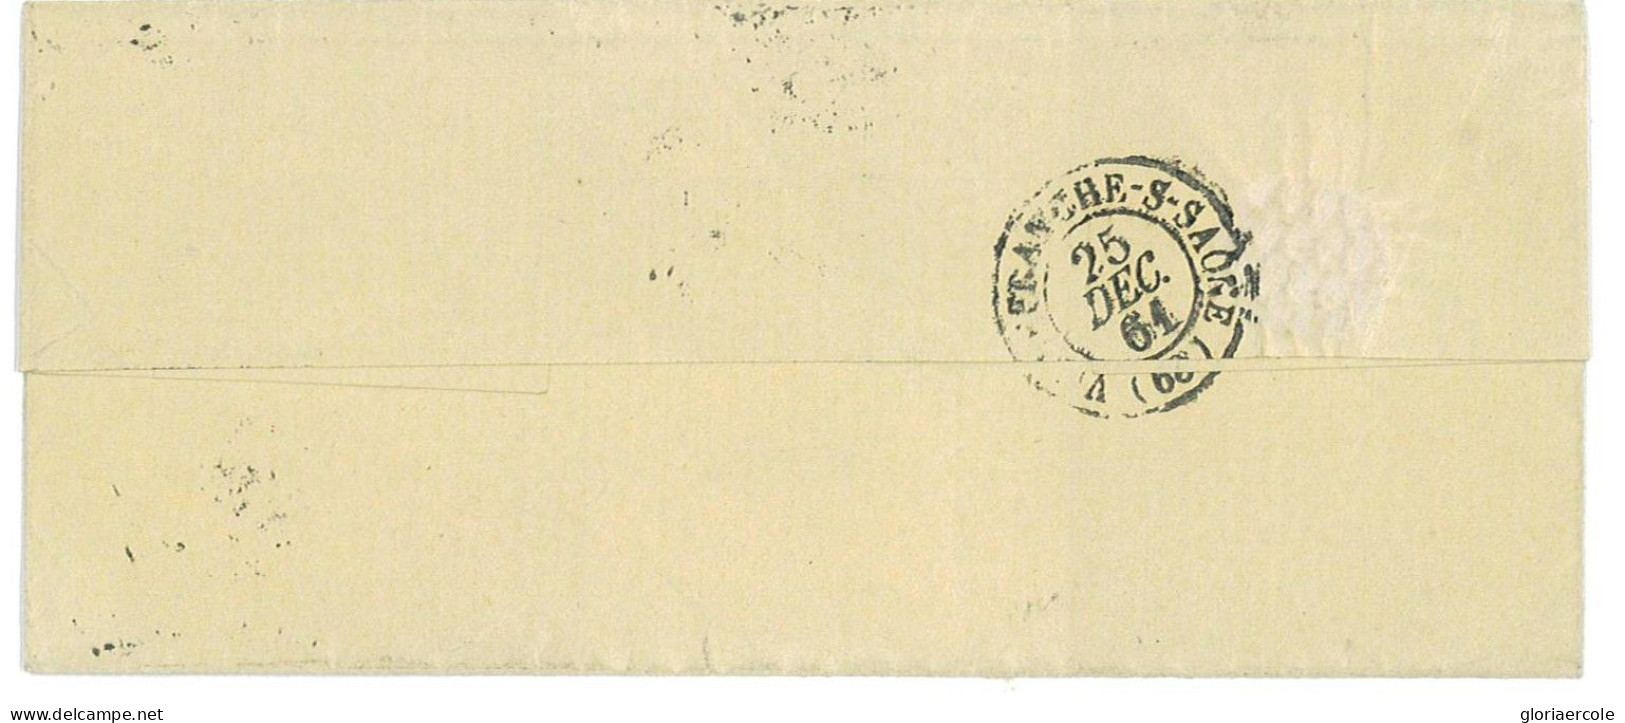 P2865 - FRANCE YVERT 12 A VERT JAUNE, 2 STAMPS ON FOLDED LETTER, LOCAL USE 1861 VILLEFRANCHE - 1853-1860 Napoleon III